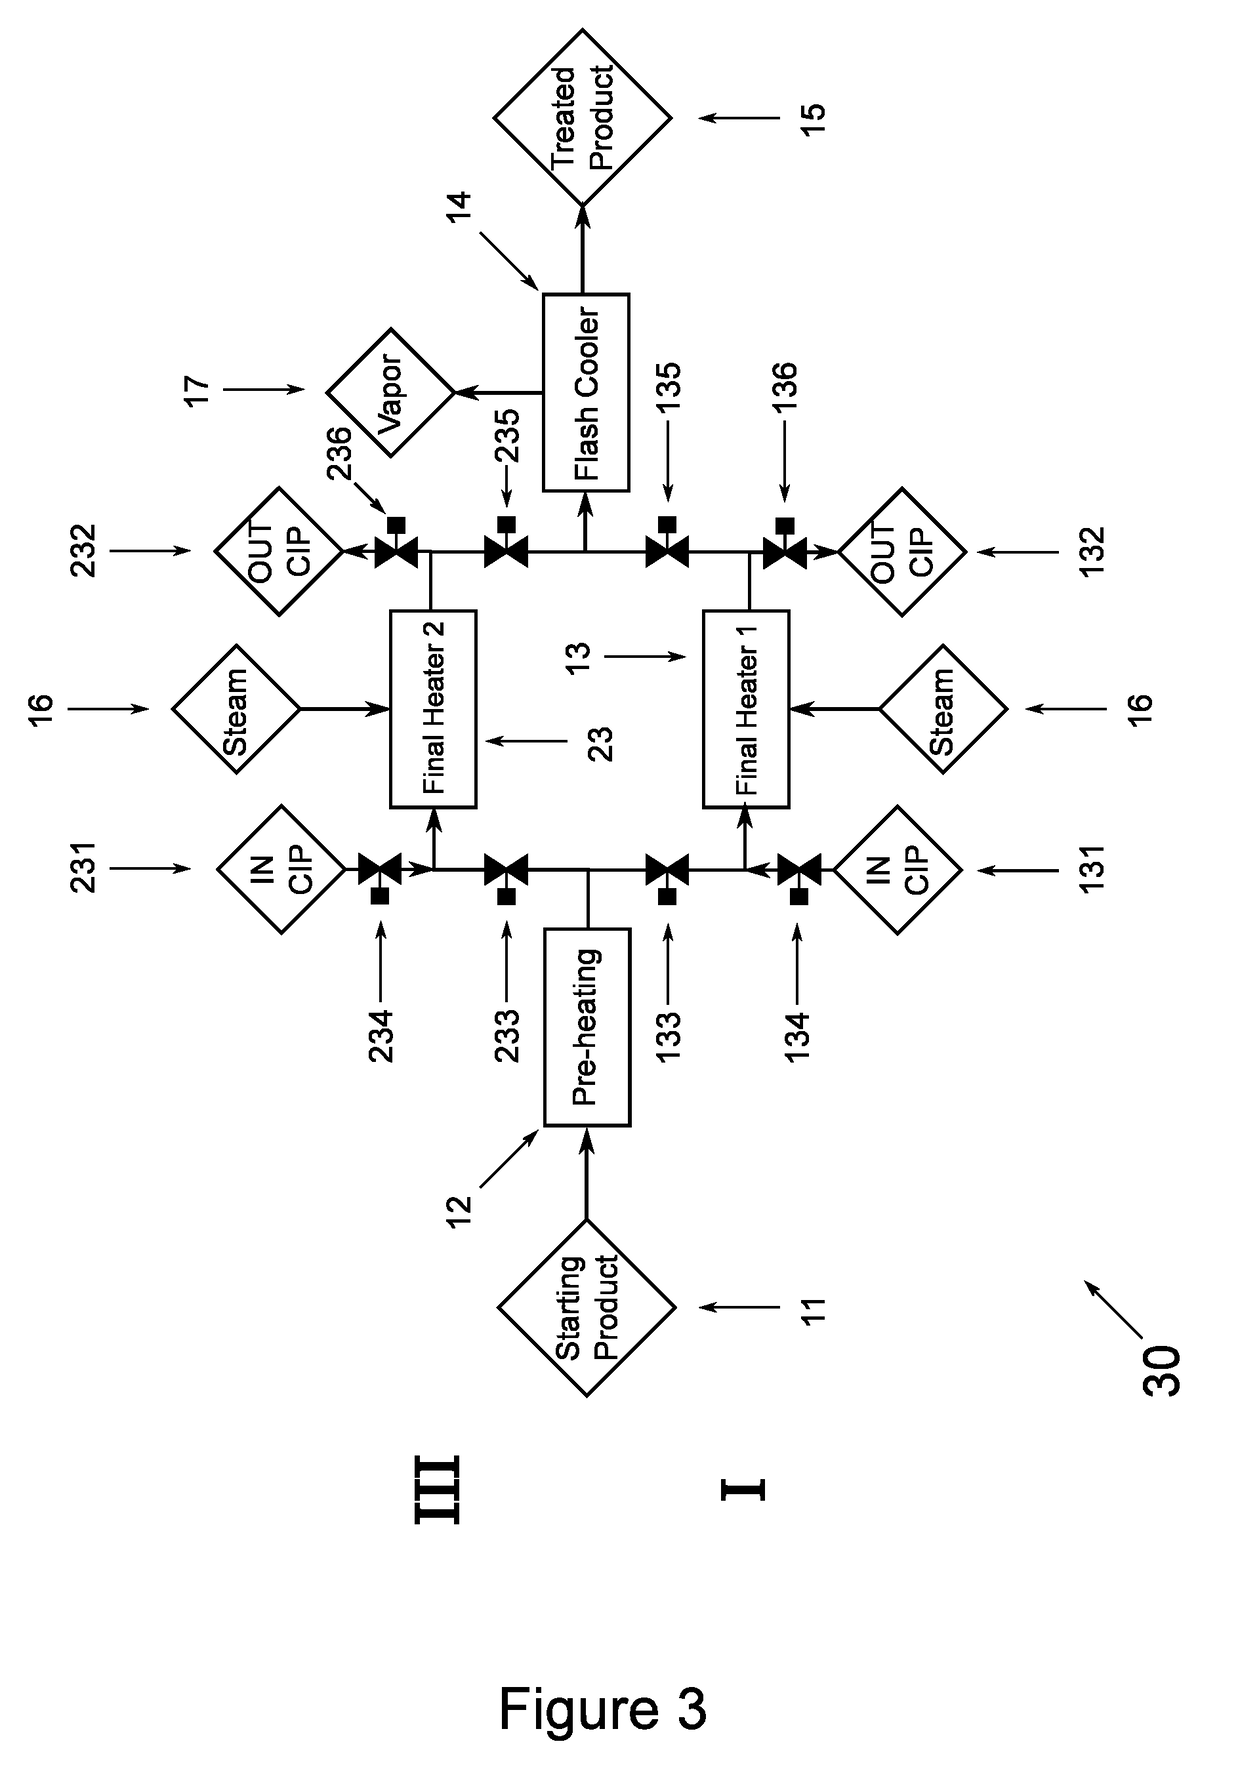 Method of cleaning a high temperature food processing line in place and food sterilization line